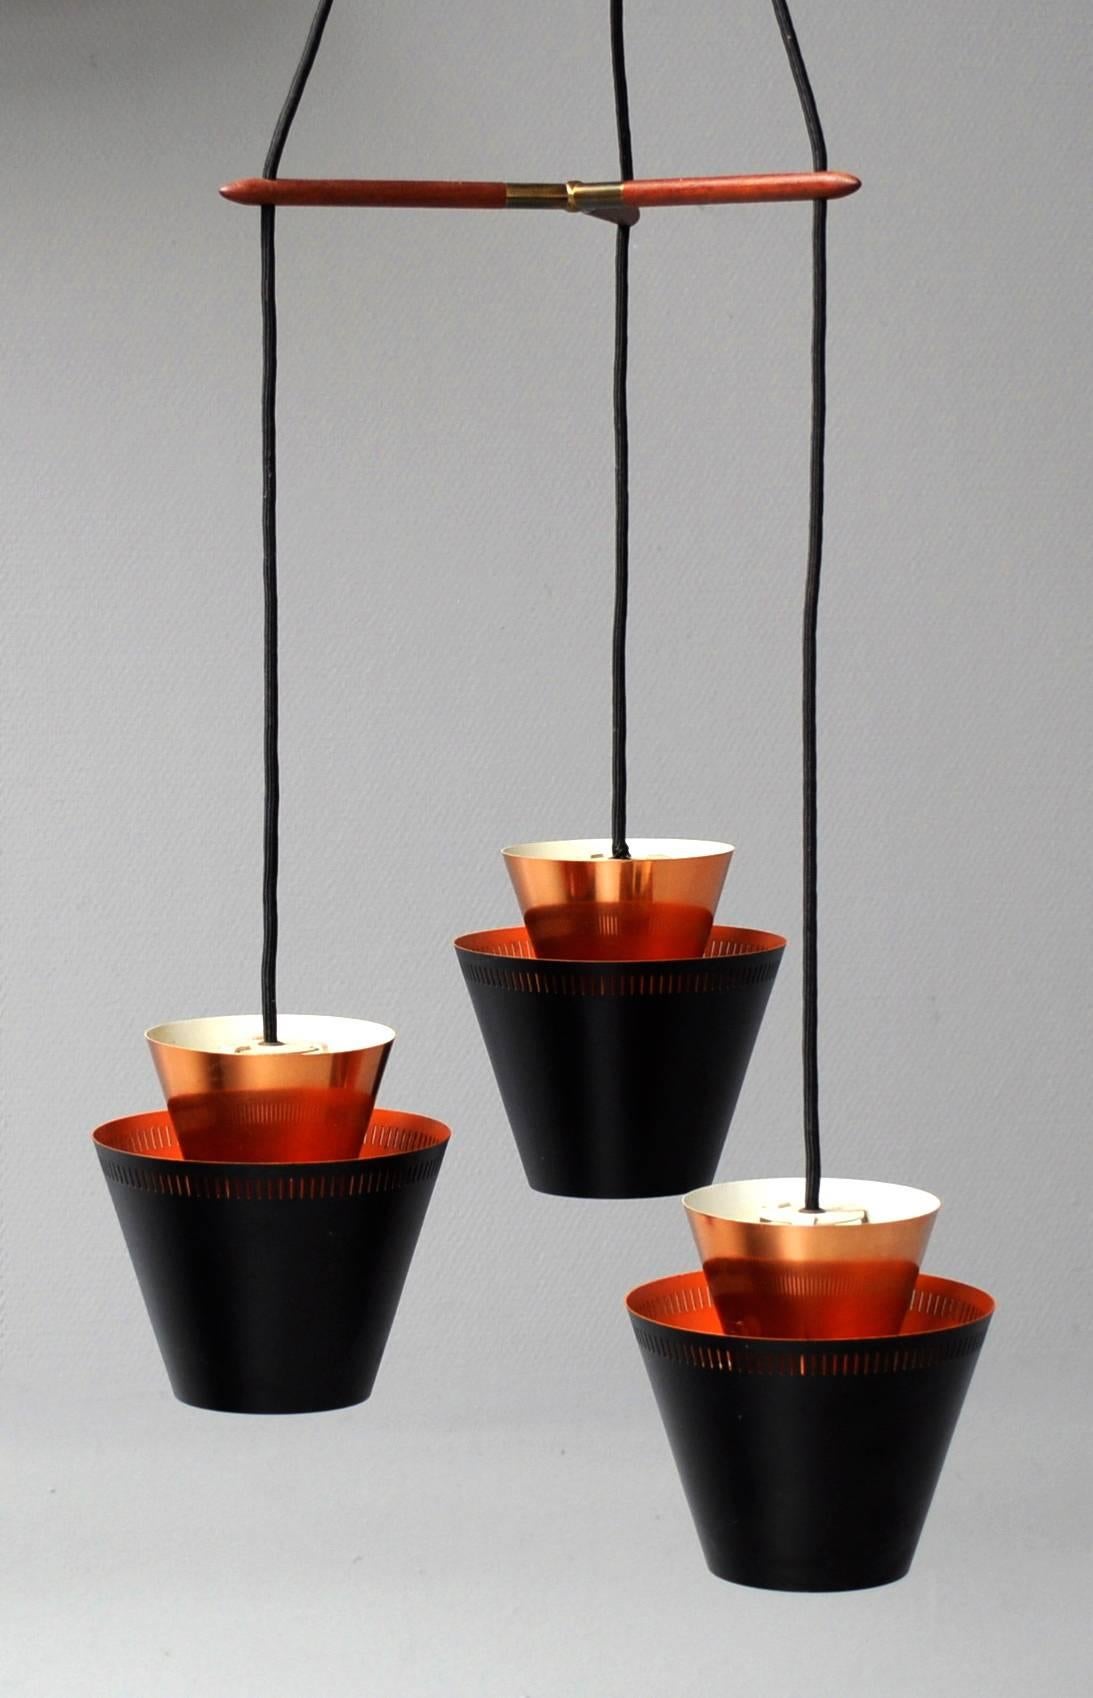 Mid-Century Fog & Mørup pendant from the 1960s, designed by Jo Hammerborg. The lamp features three trapeze lampshades, which are double layered: one in copper and one in black lacquered metal. Comes with a rosewood hanger and brass attachment